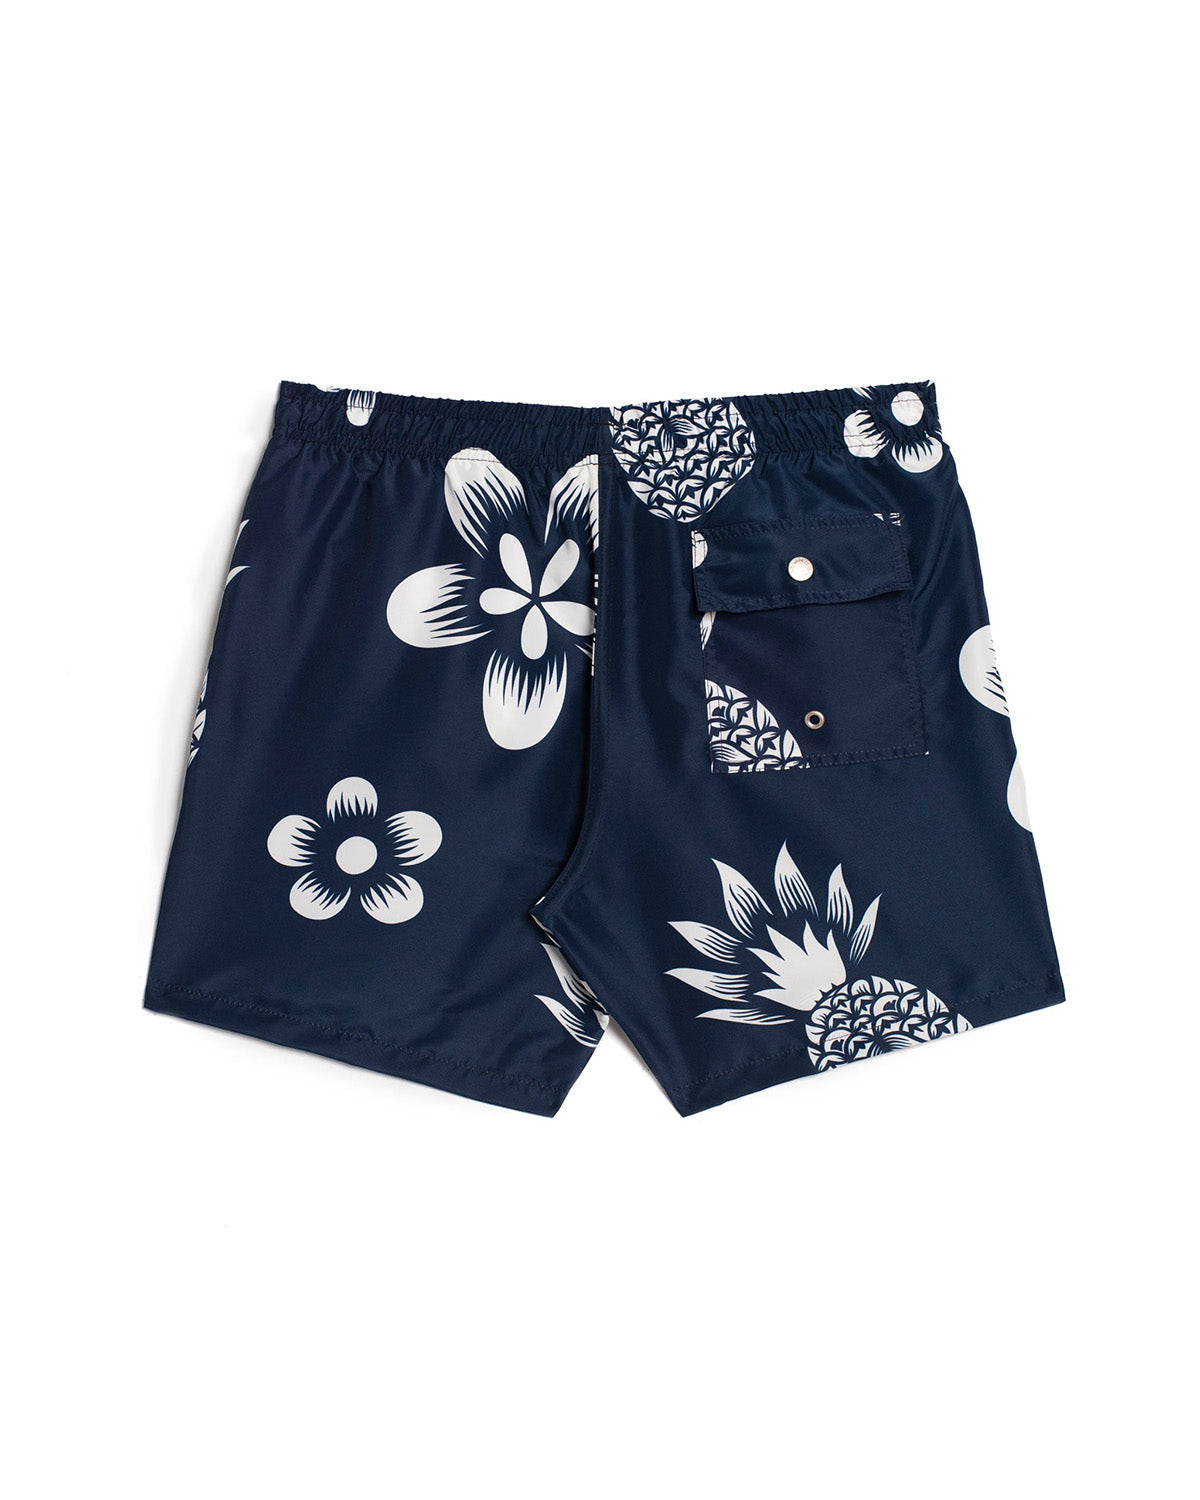 back view of navy Bather swim trunk with white pineapple and floral pattern